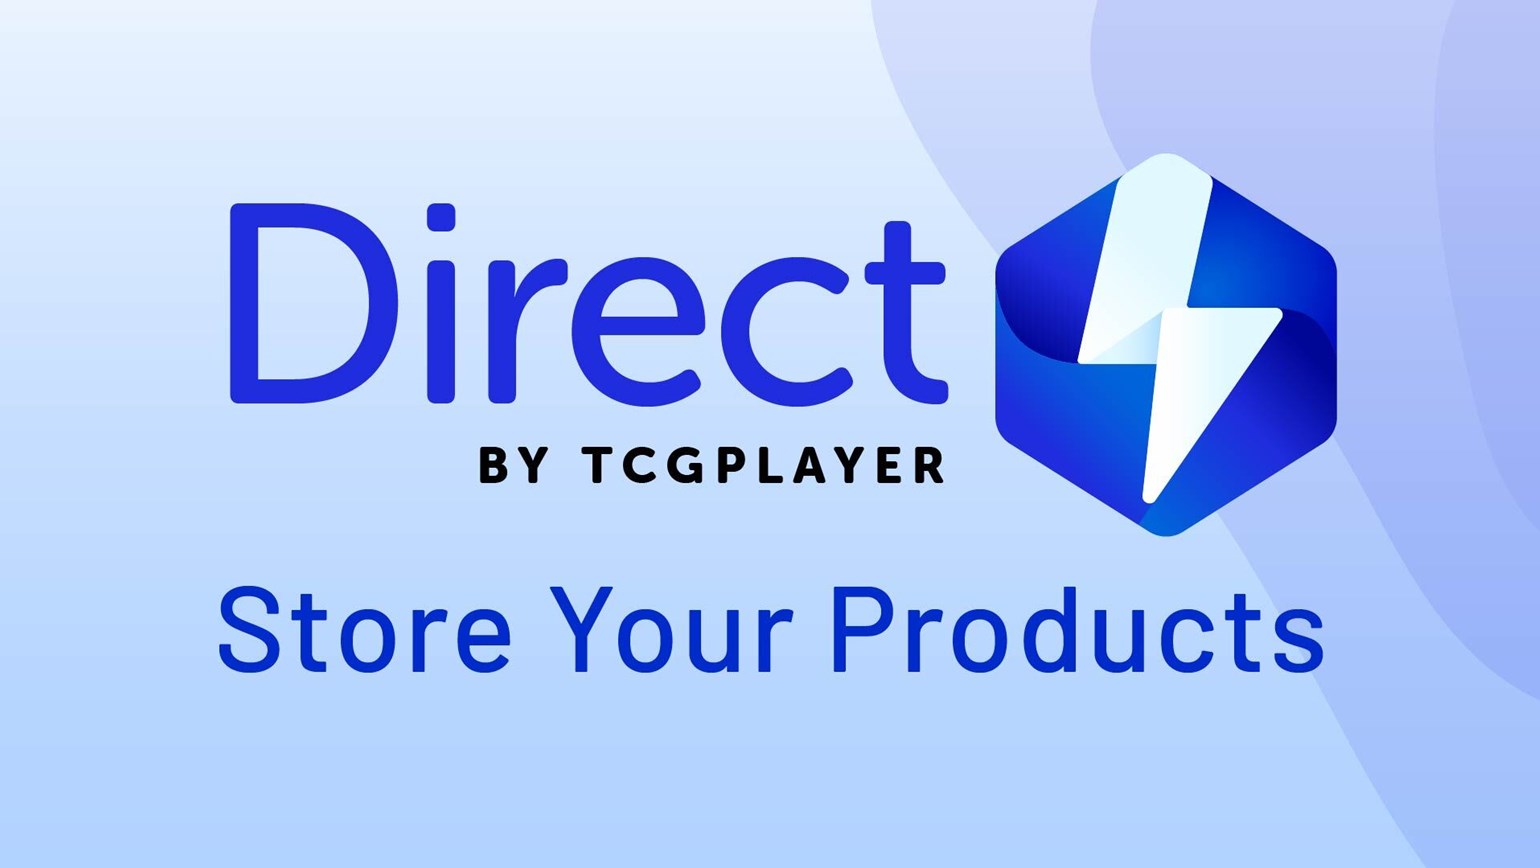 Direct by TCGplayer - Store Your Products